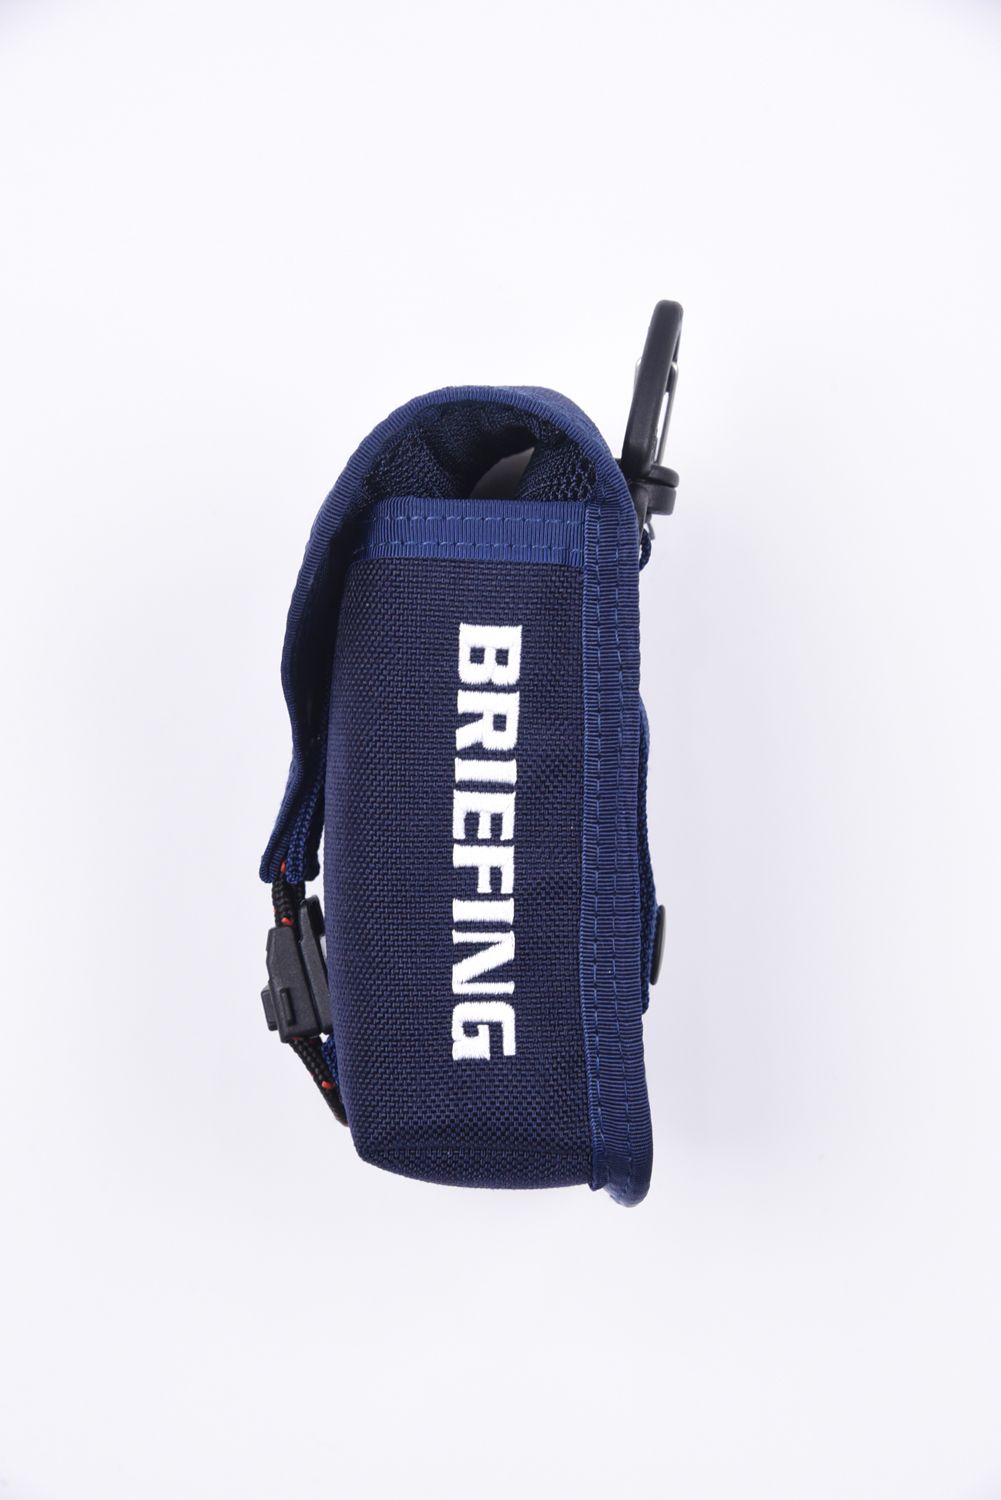 BRIEFING - 【STANDARD SERIES】 SCOPE BOX POUCH 1000D / スコープ 